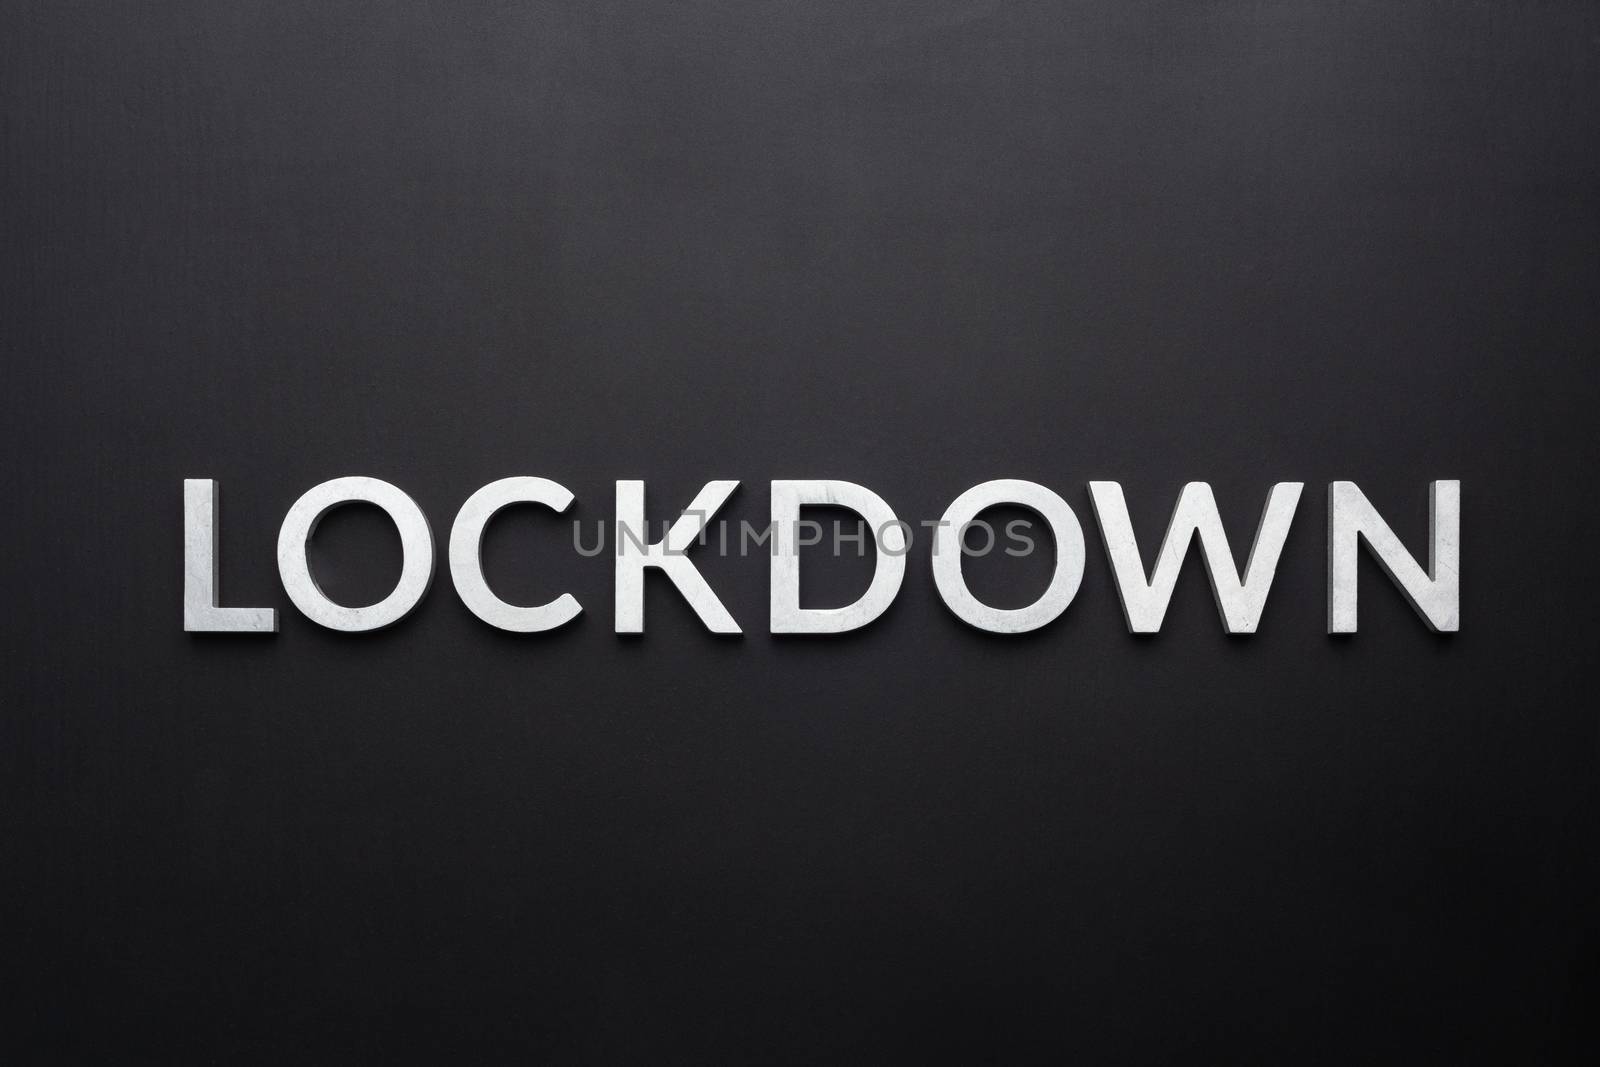 the word lockdown laid with silver metal letters on flat black background in directly above perspective.